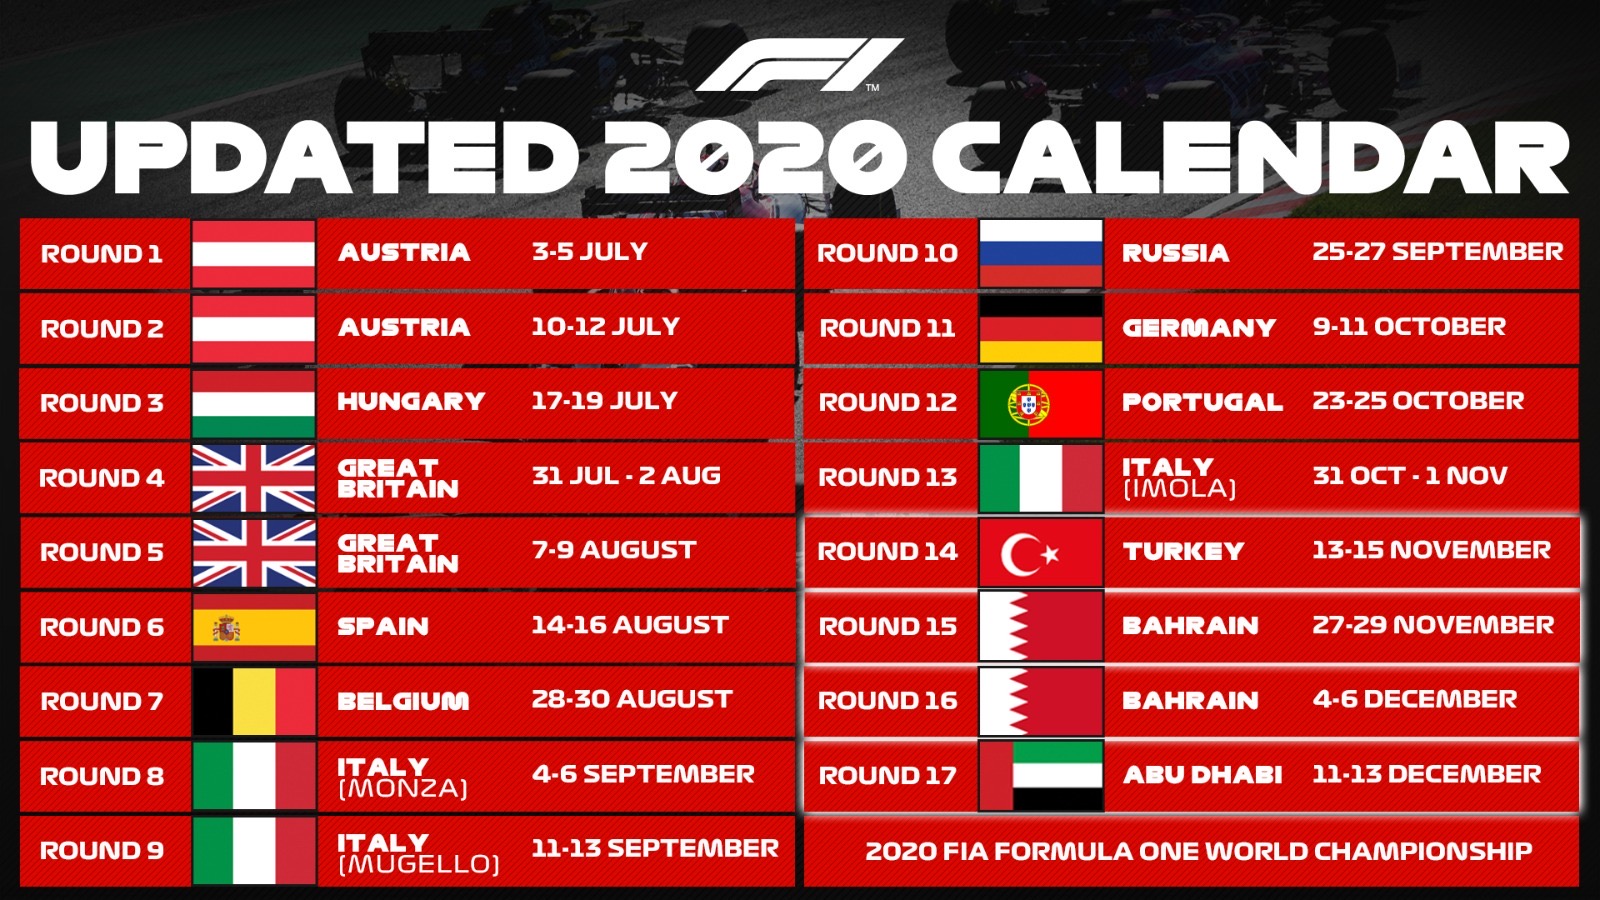 jump in Forge Marco Polo Formula 1 on Twitter: "Here's the updated 2020 race calendar 👀 #F1  https://t.co/o6INhA3YY8" / Twitter